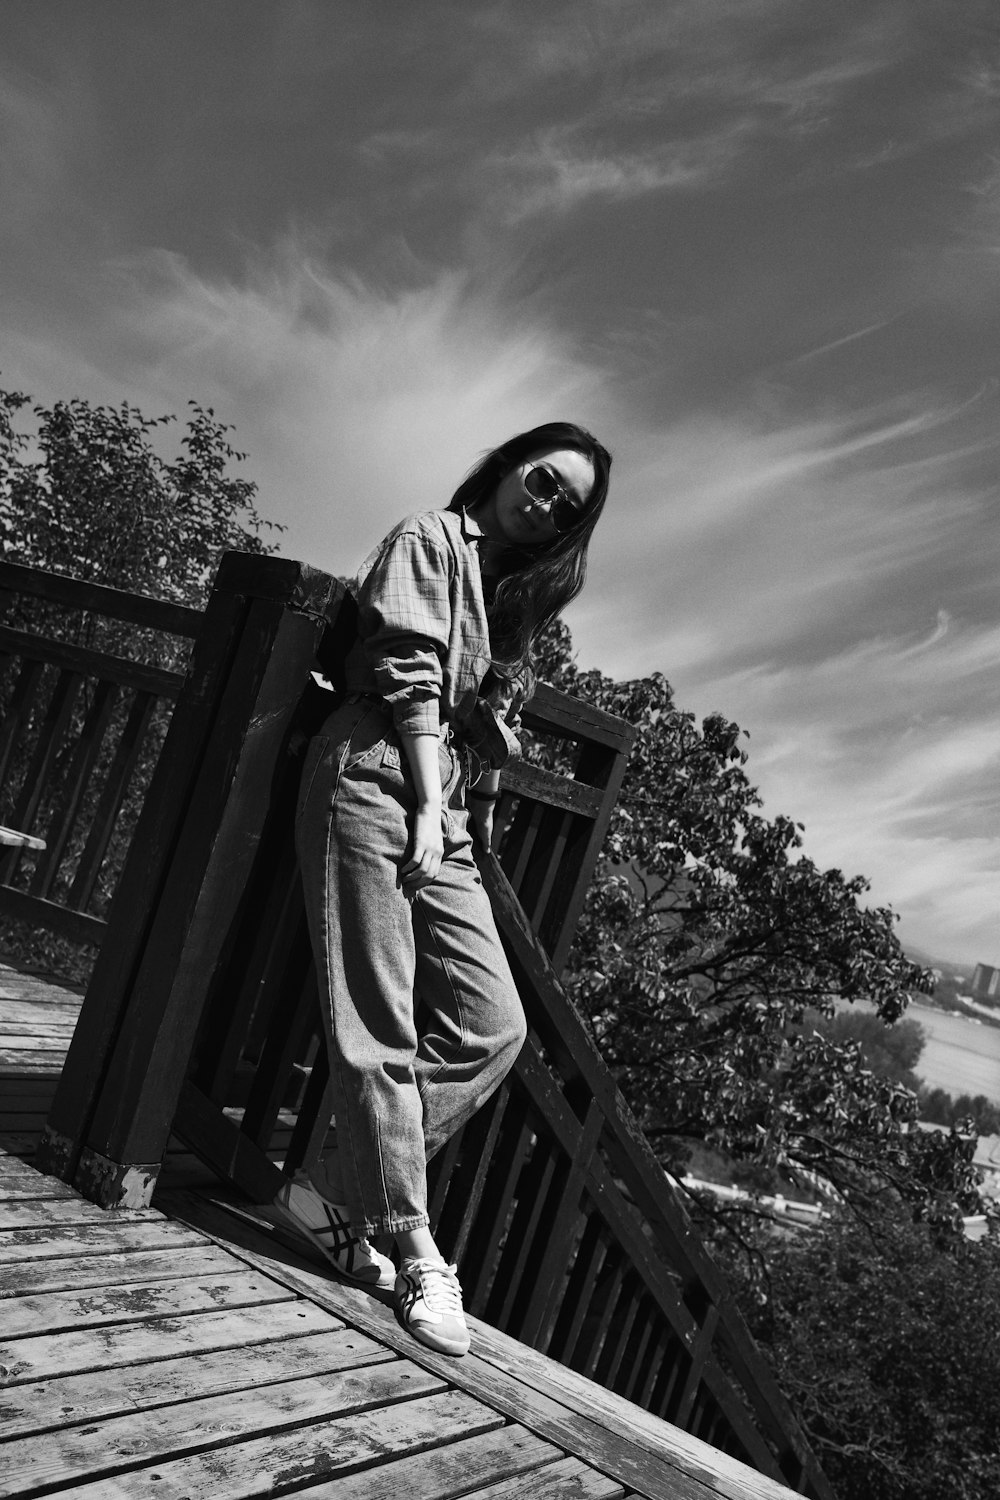 grayscale photo of person in hoodie and pants standing on wooden dock